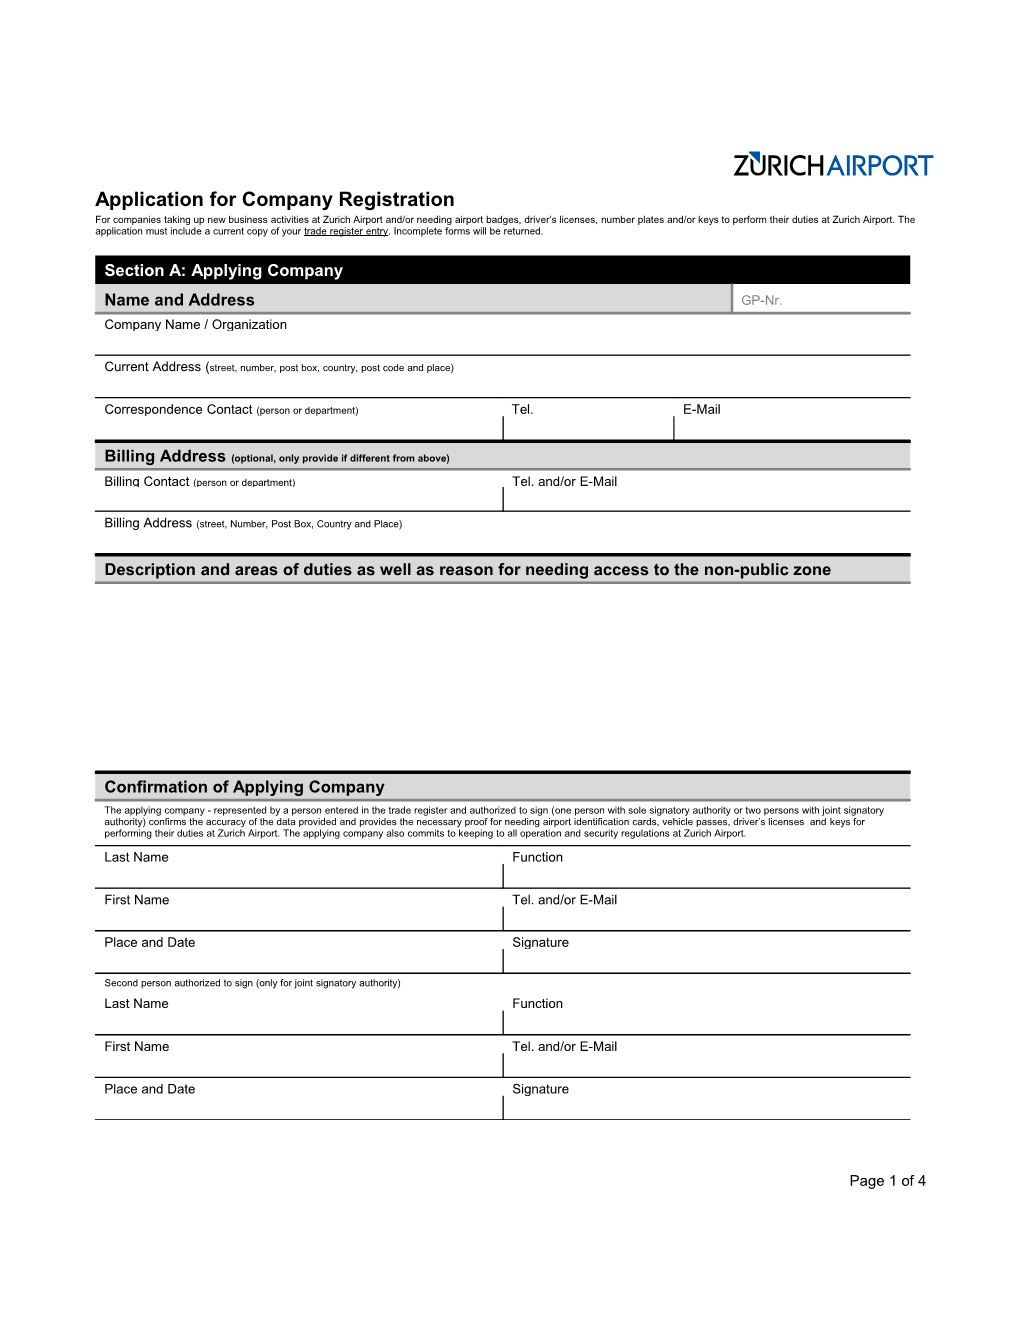 Application for Company Registration